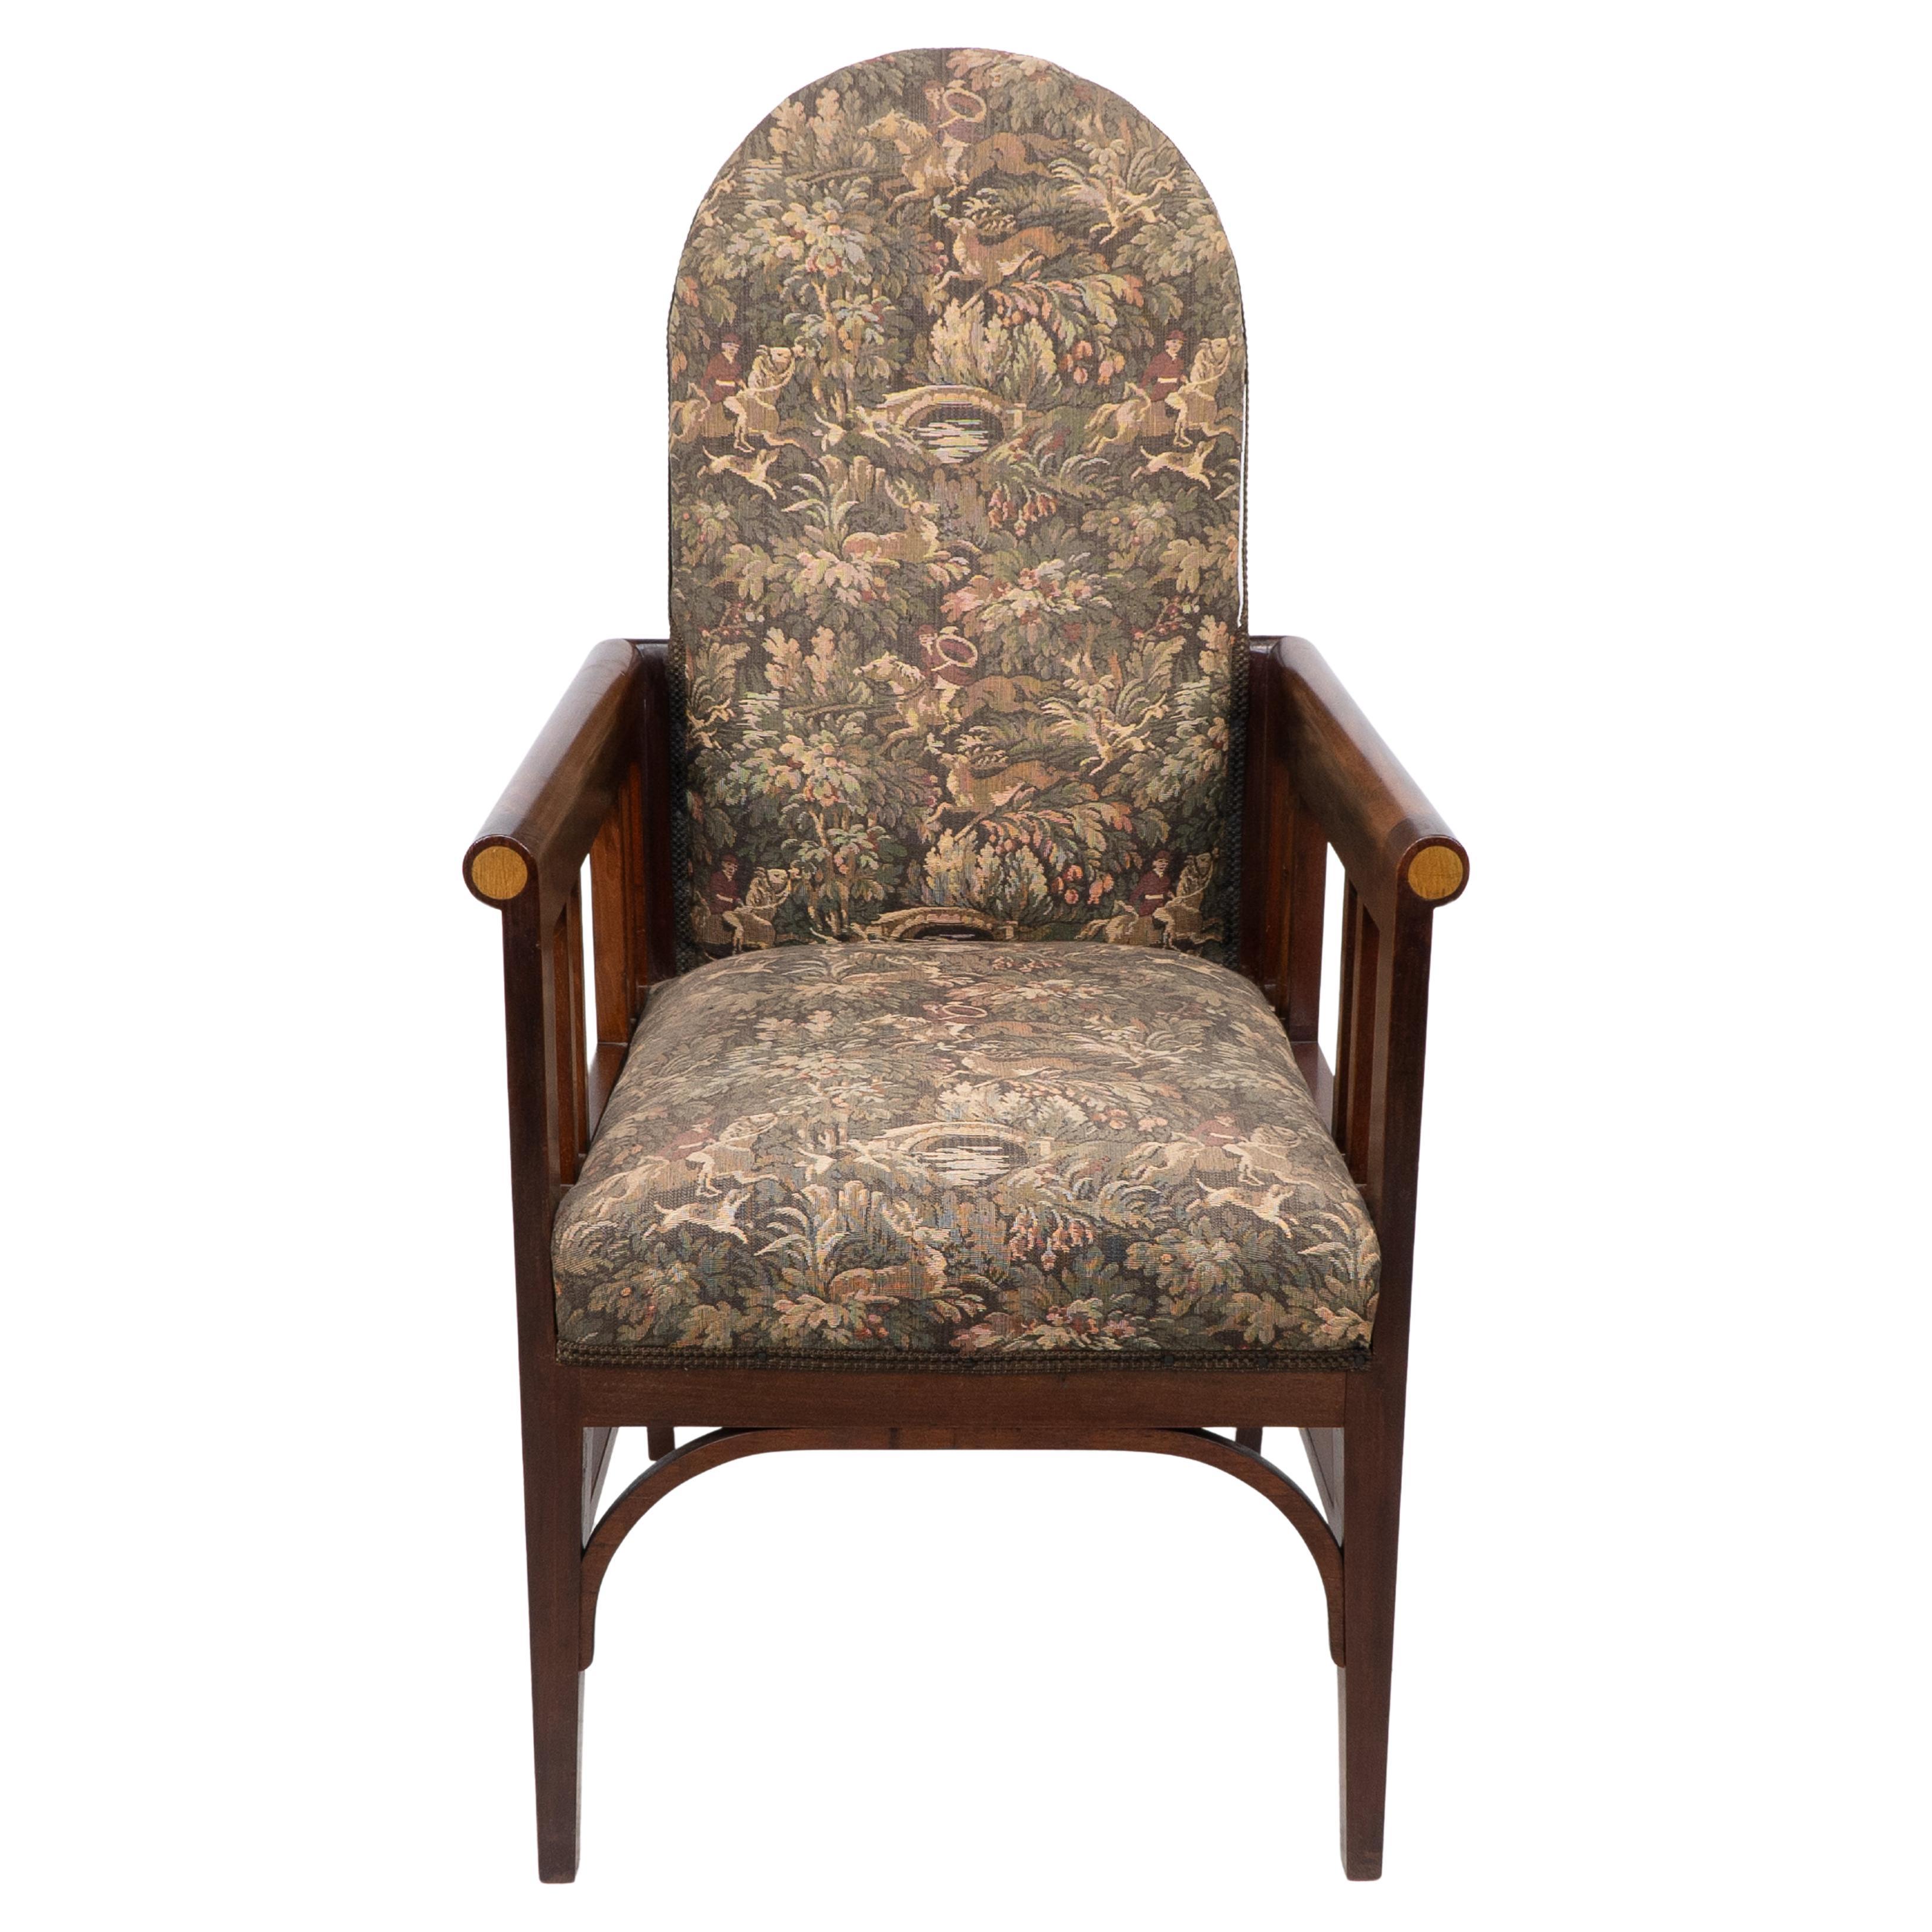 G M Ellwood for J S Henry. A rare progressive new art armchair. The rounded top follows down the backrest sides and meets the rounded roll over arms that in turn join the rear legs, a very particular well designed intersection of three parts of the